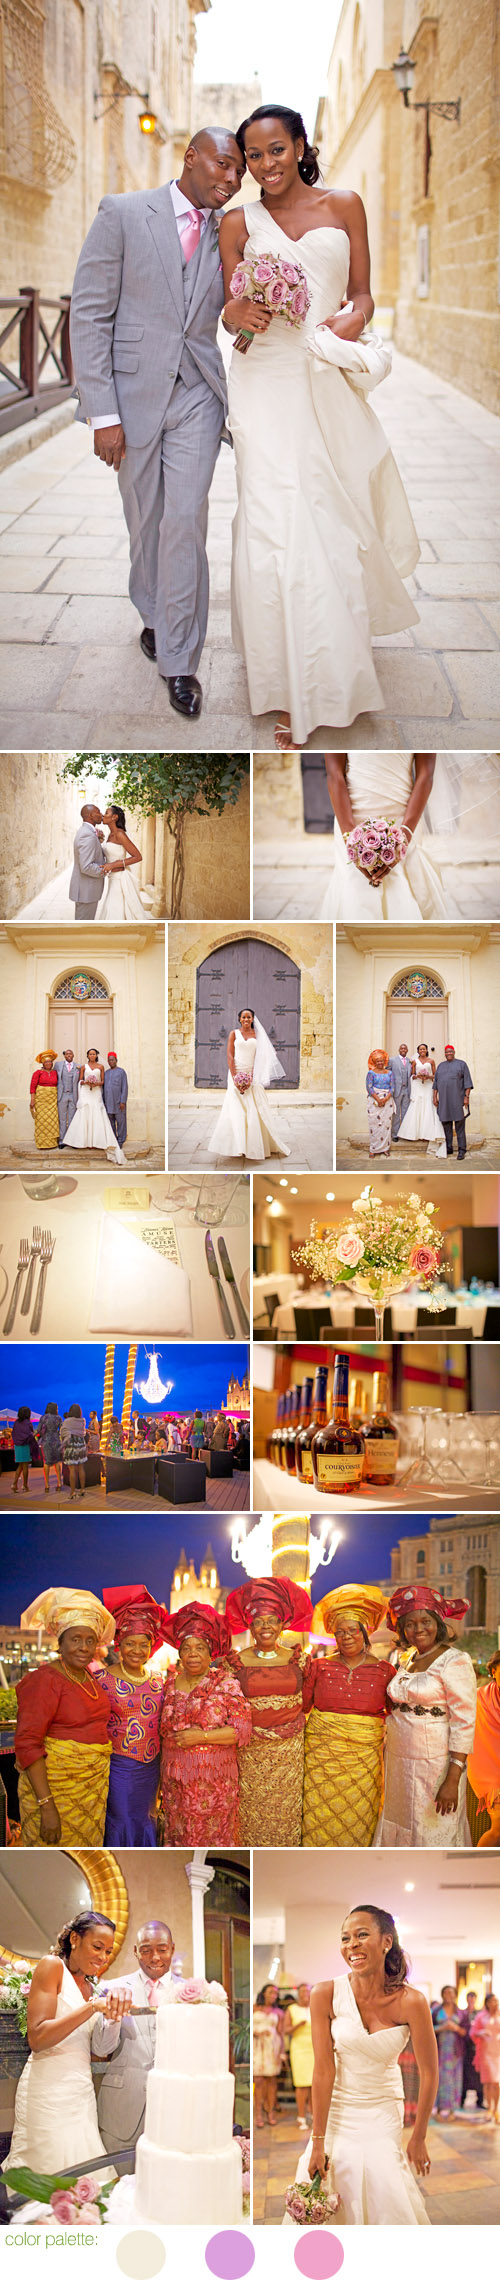 Mdina, Malta wedding at The Villa Brasserie, photos by Melissa O'Connell of Fresh In Love Photography